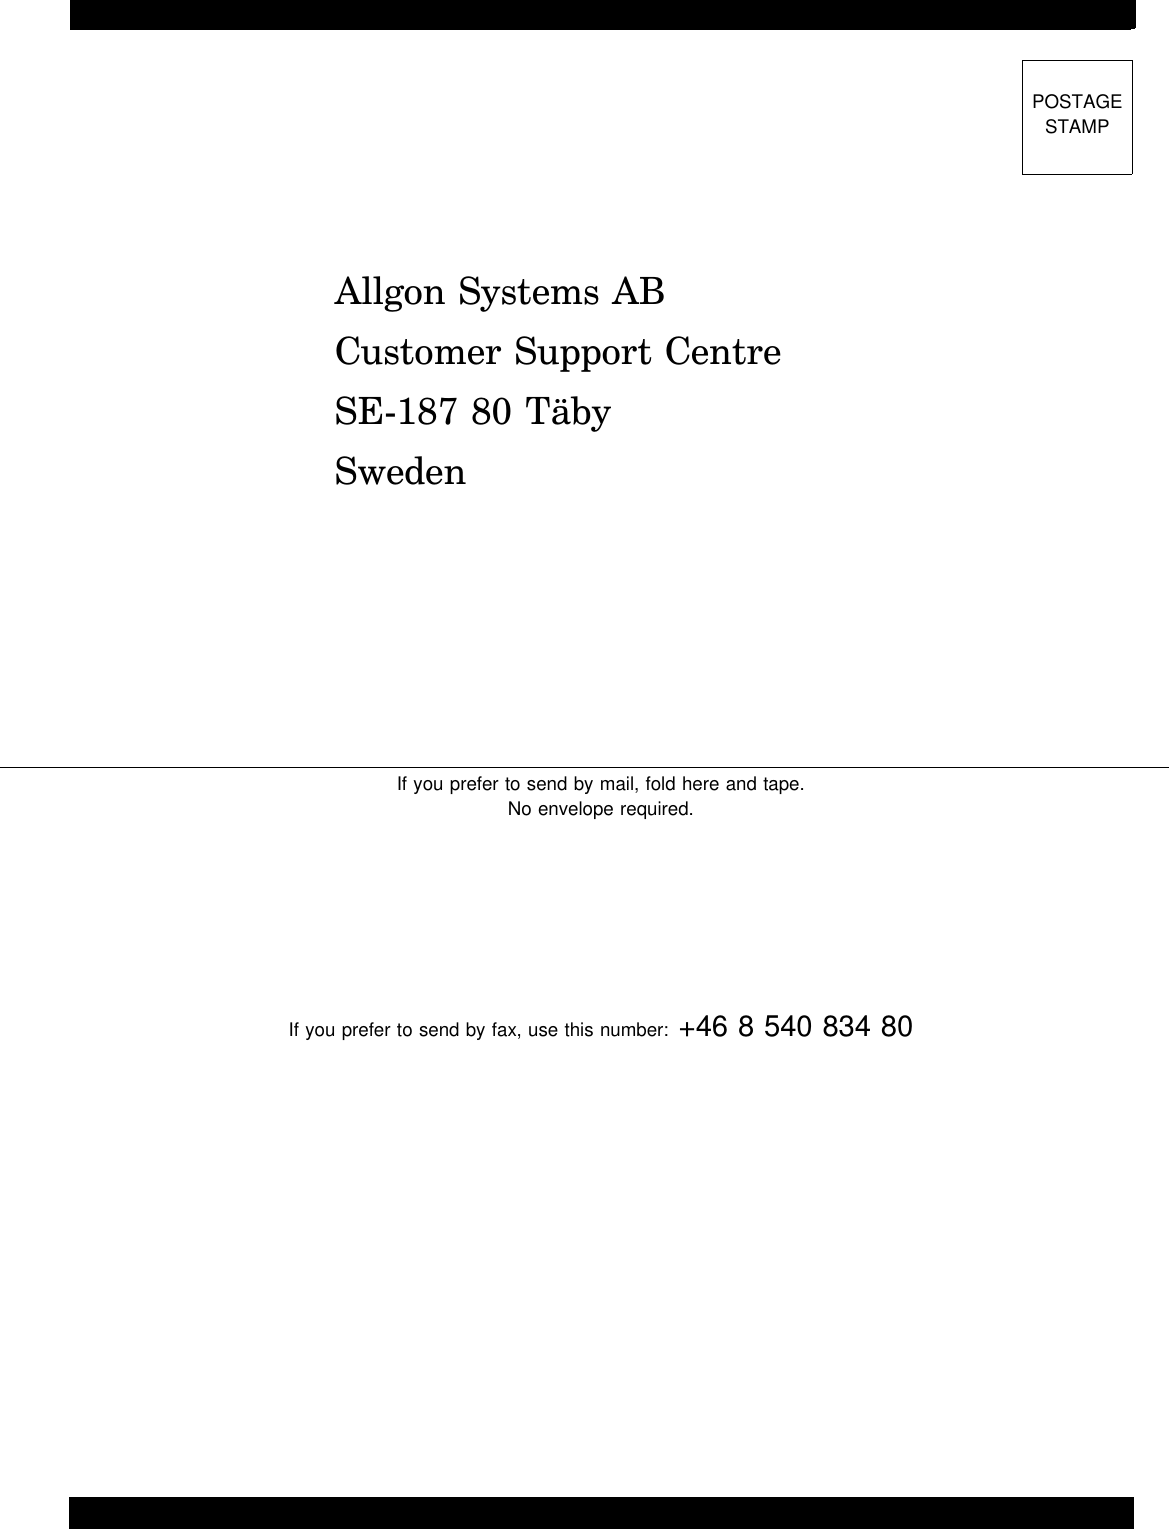 Allgon Systems ABCustomer Support CentreSE-187 80 TäbySwedenIf you prefer to send by mail, fold here and tape.No envelope required.If you prefer to send by fax, use this number: +46 8 540 834 80POSTAGESTAMP ALLGON Systems AB ALR Compact Repeater QuestionnaireVD203 67/EN - User’s Manual Rev. 1A  2000-07 Q - 2